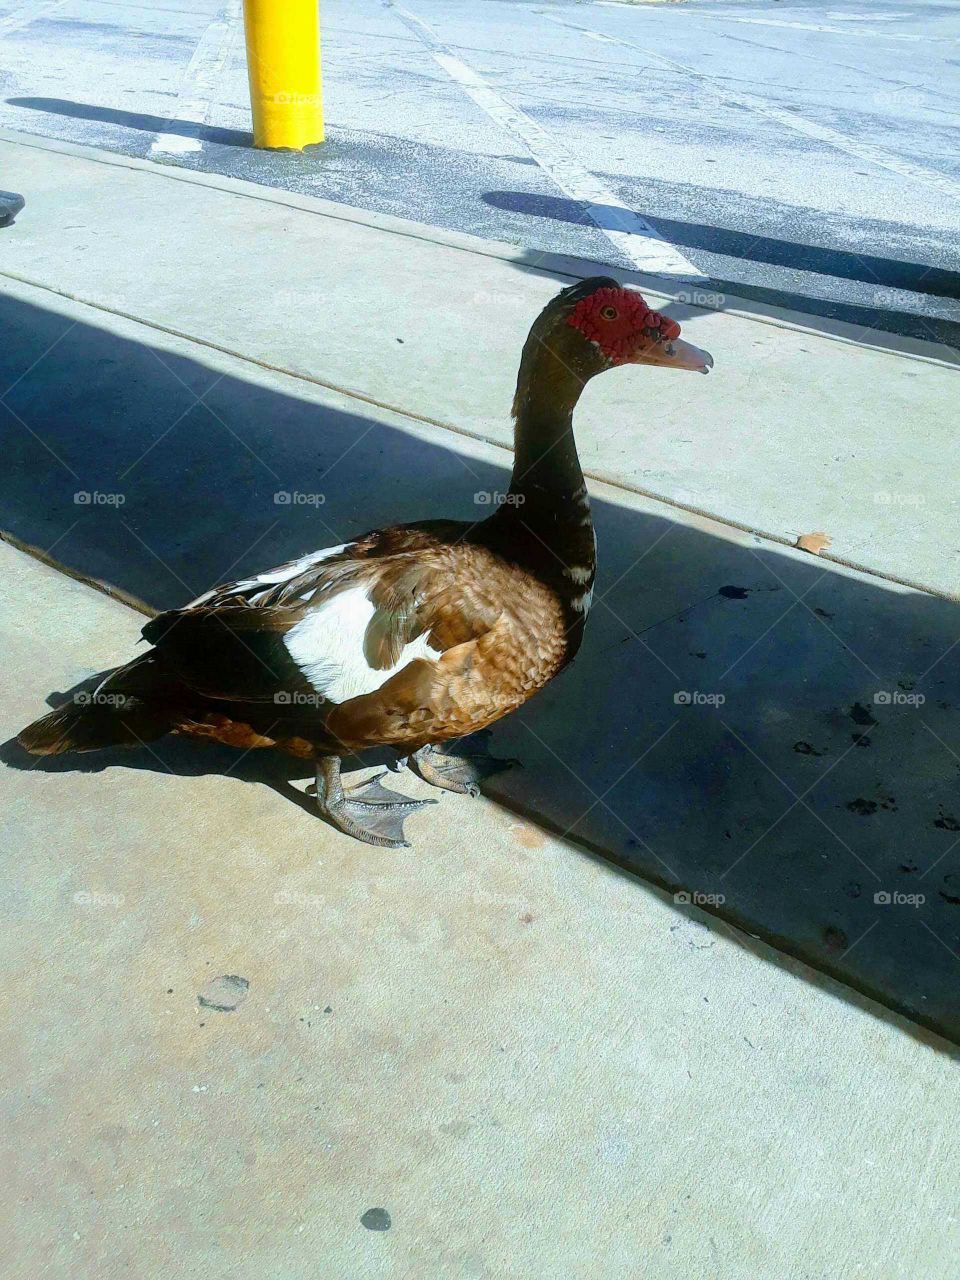 This large brown, white, and red duck was standing outside of the Winn Dixie supermarket greeting customers. This was taken at the entrance of the New Smyrna Beach, Florida Winn Dixie in September of 2017. This friendly duck was just hanging out, and certainly was not afraid of people.